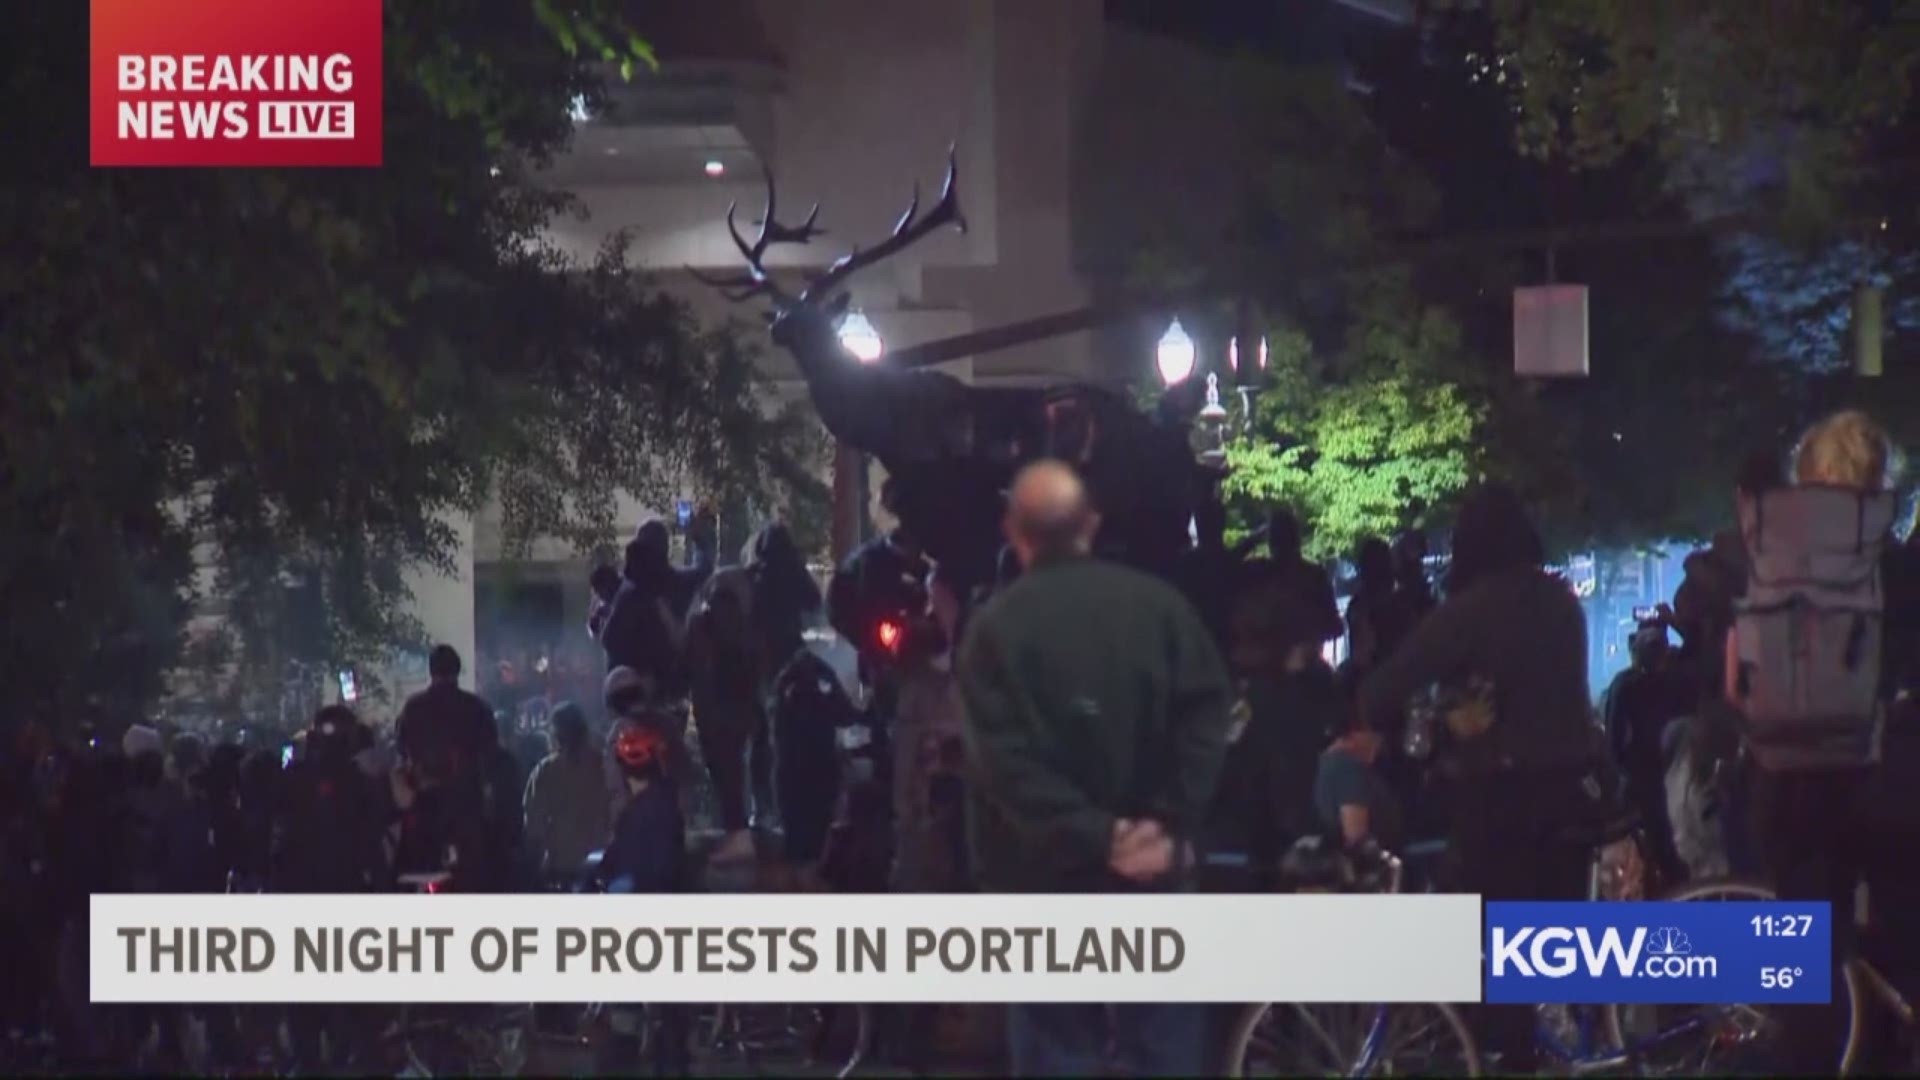 Around 11:30 p.m., Portland Police reported protesters were throwing aerial mortars at officers. Pat Dooris was reporting just down the street.